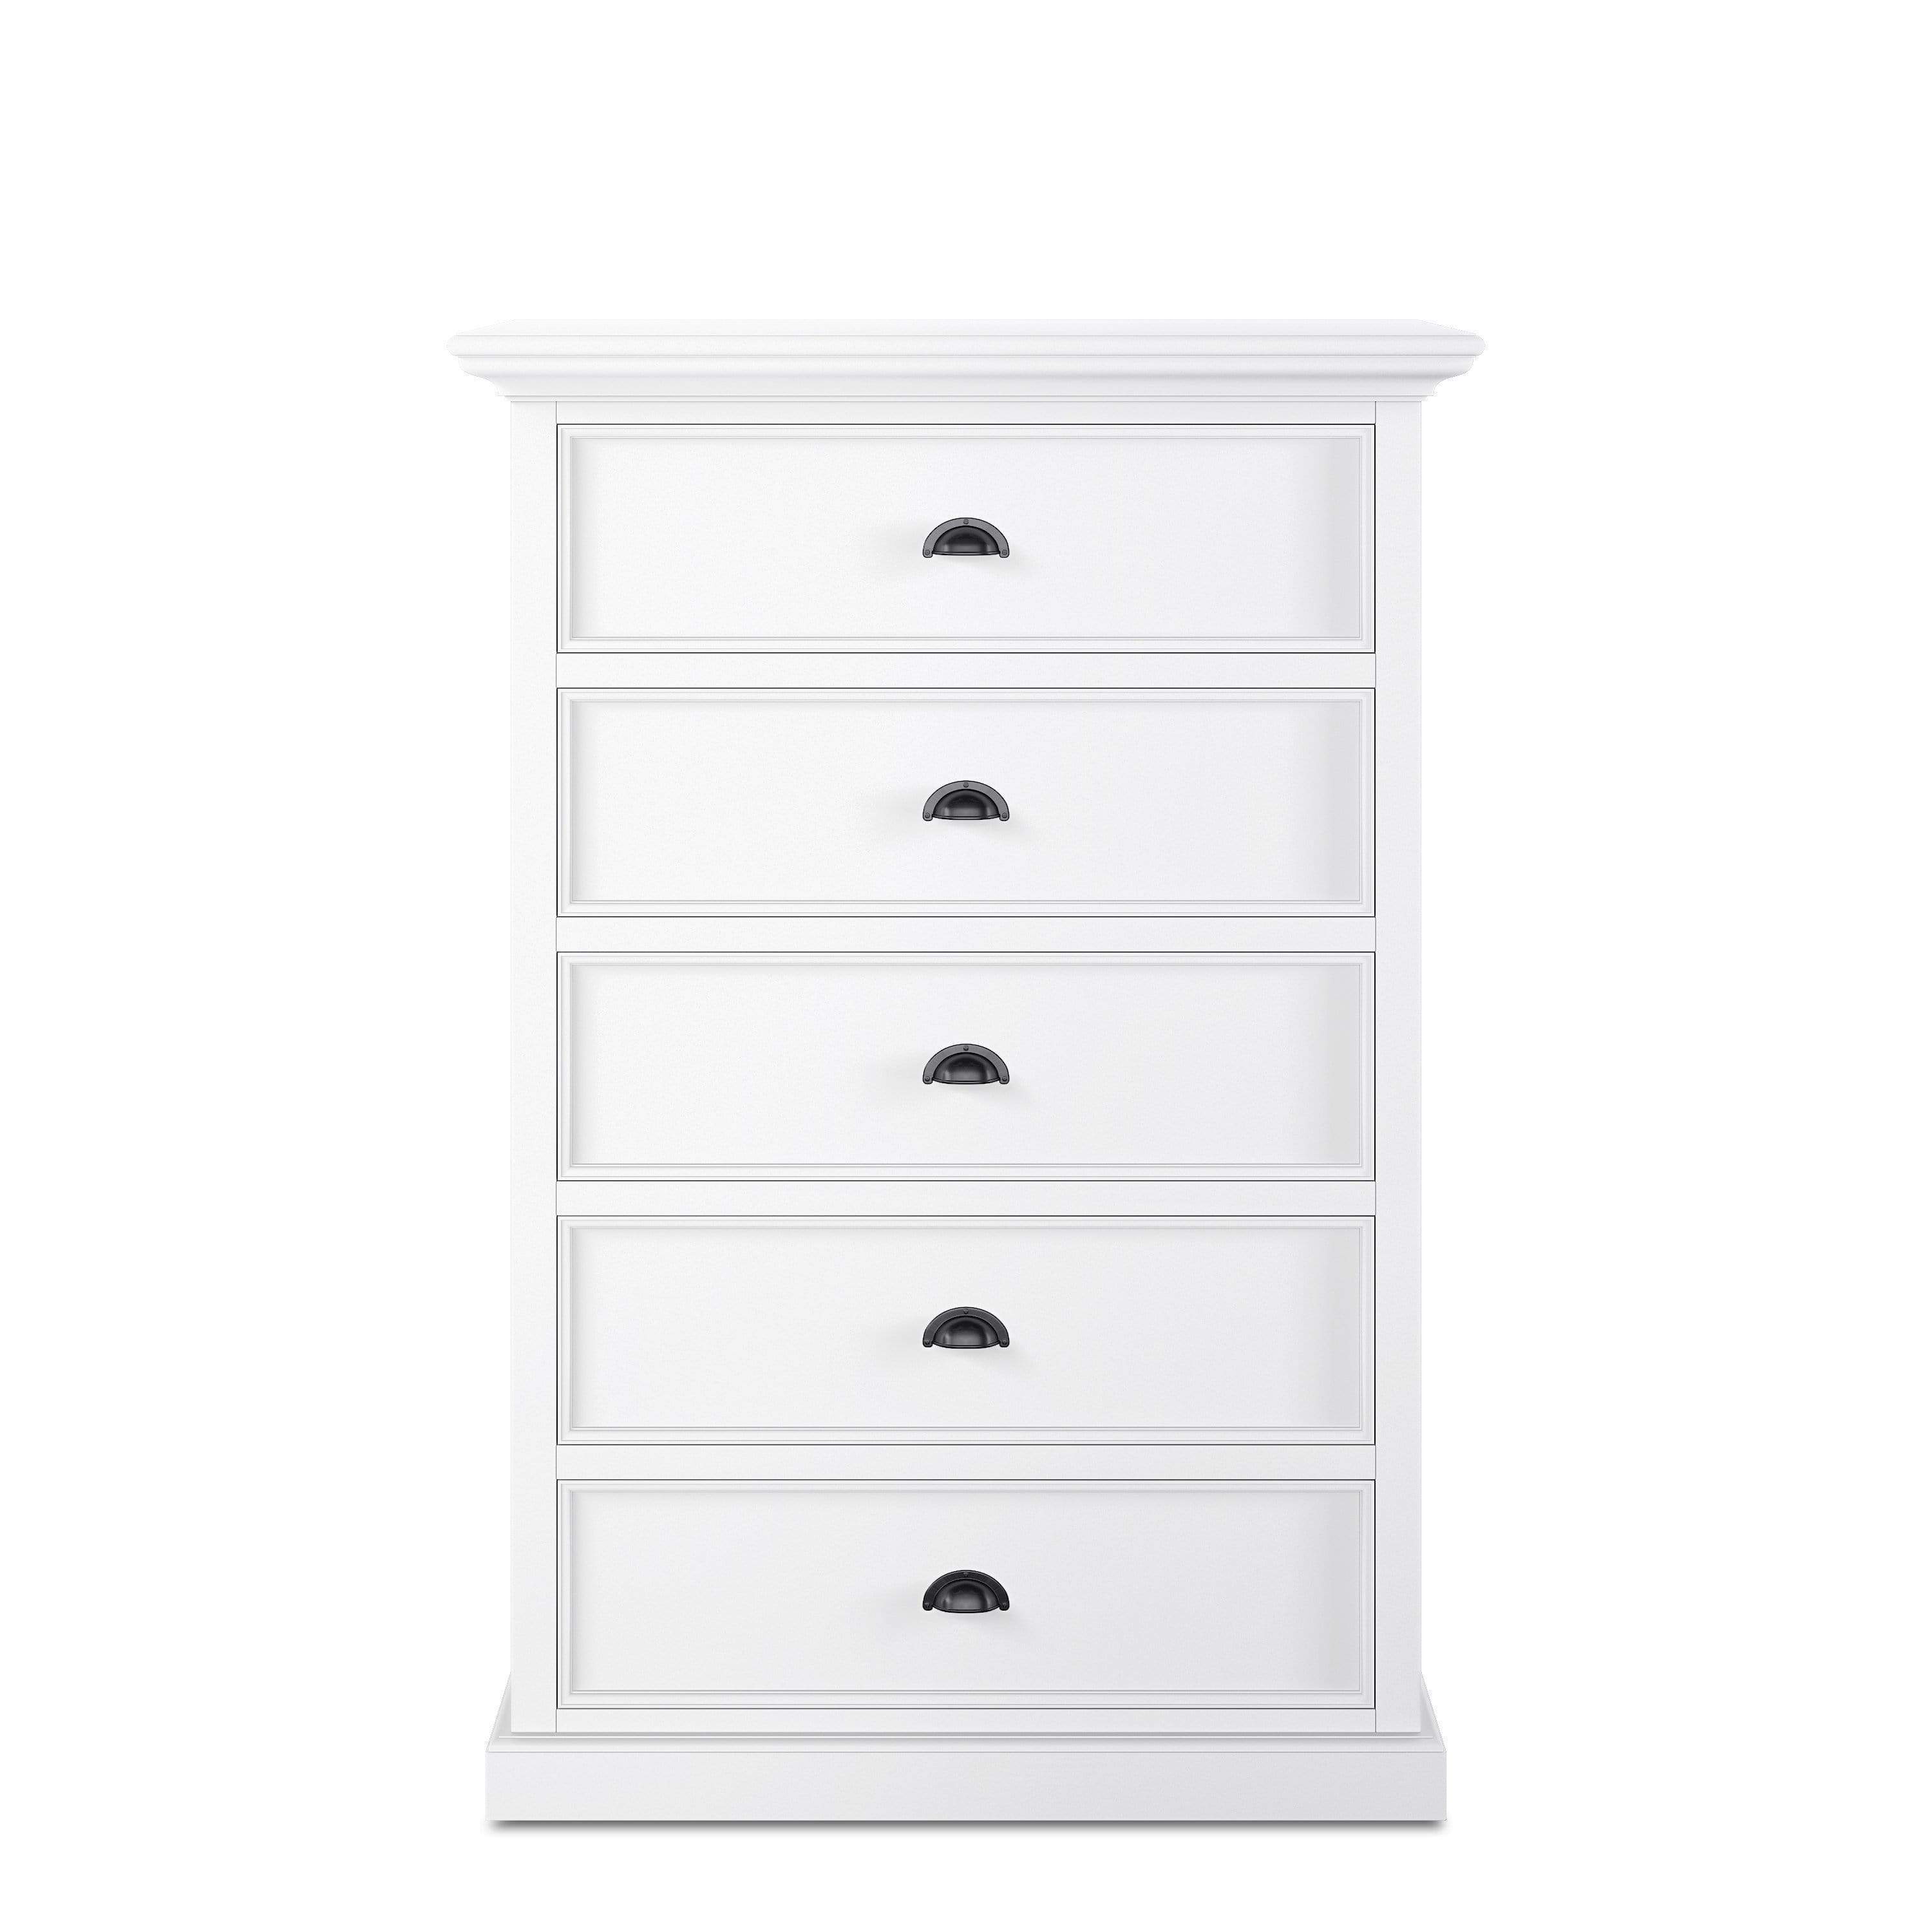 Halifax Tall Chest of Drawers - White-Dresser-by NovaSolo-I Wanna Go Home